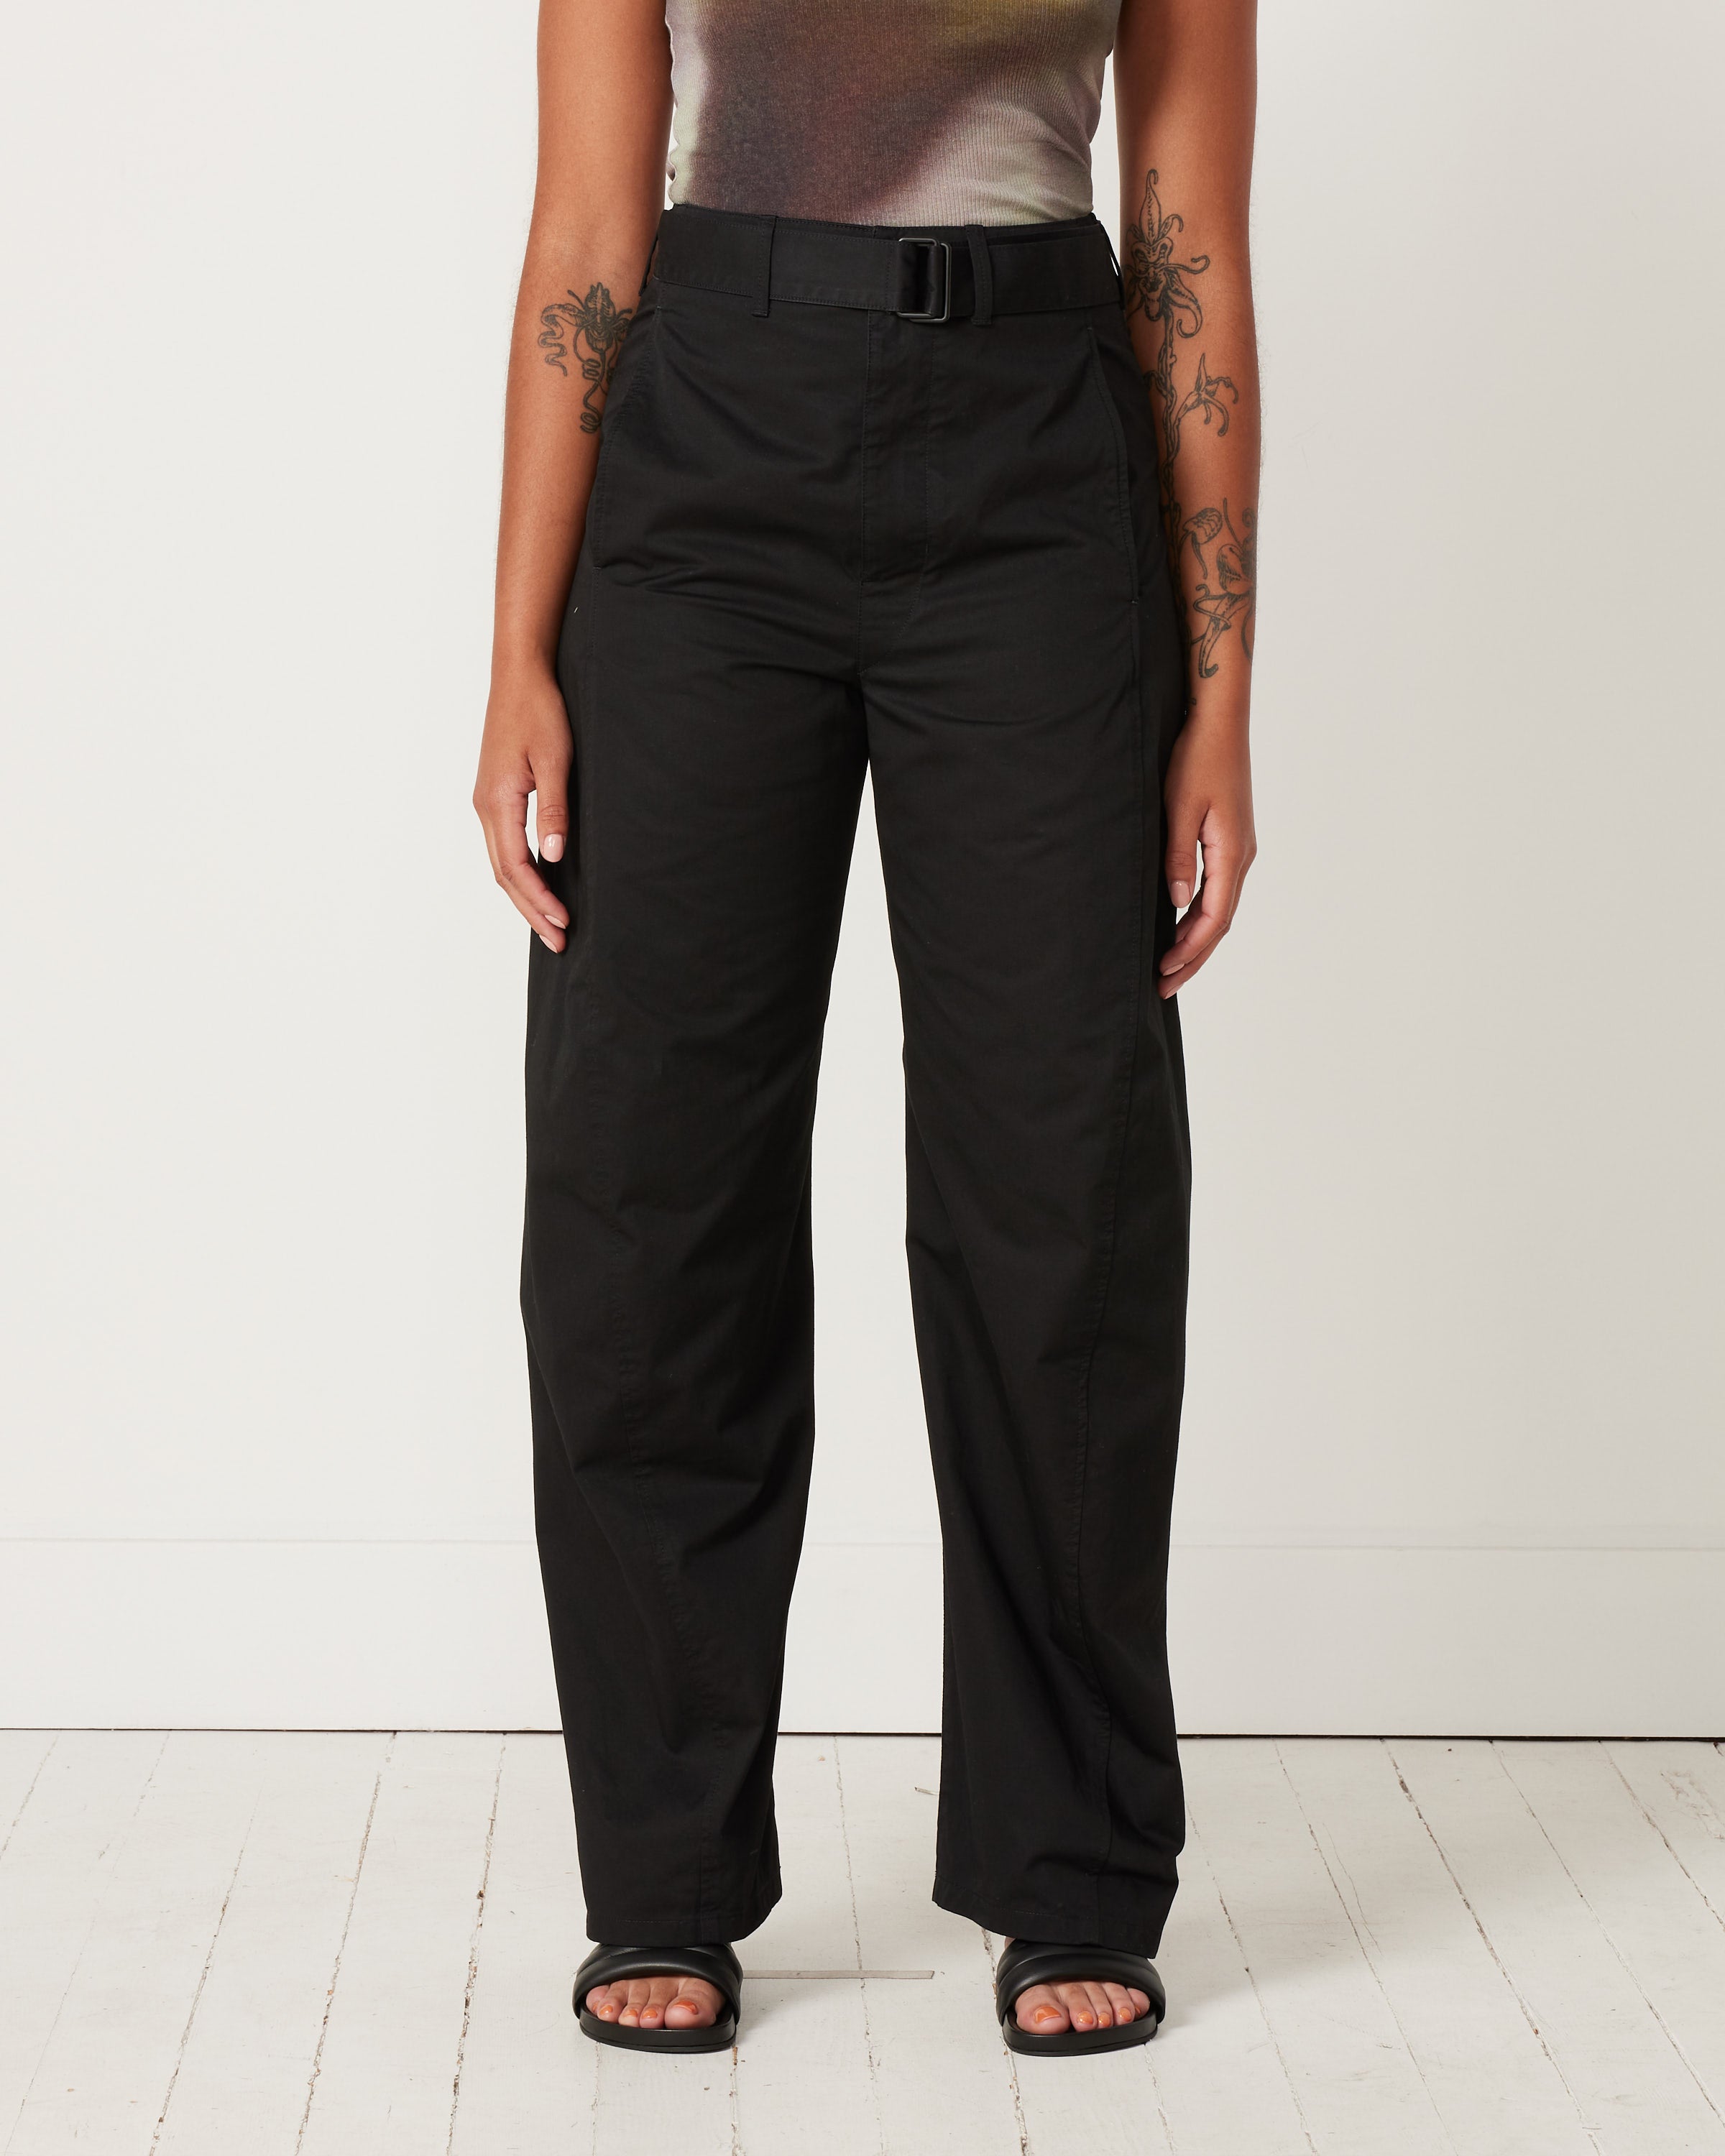 Light Belted Twisted Pants